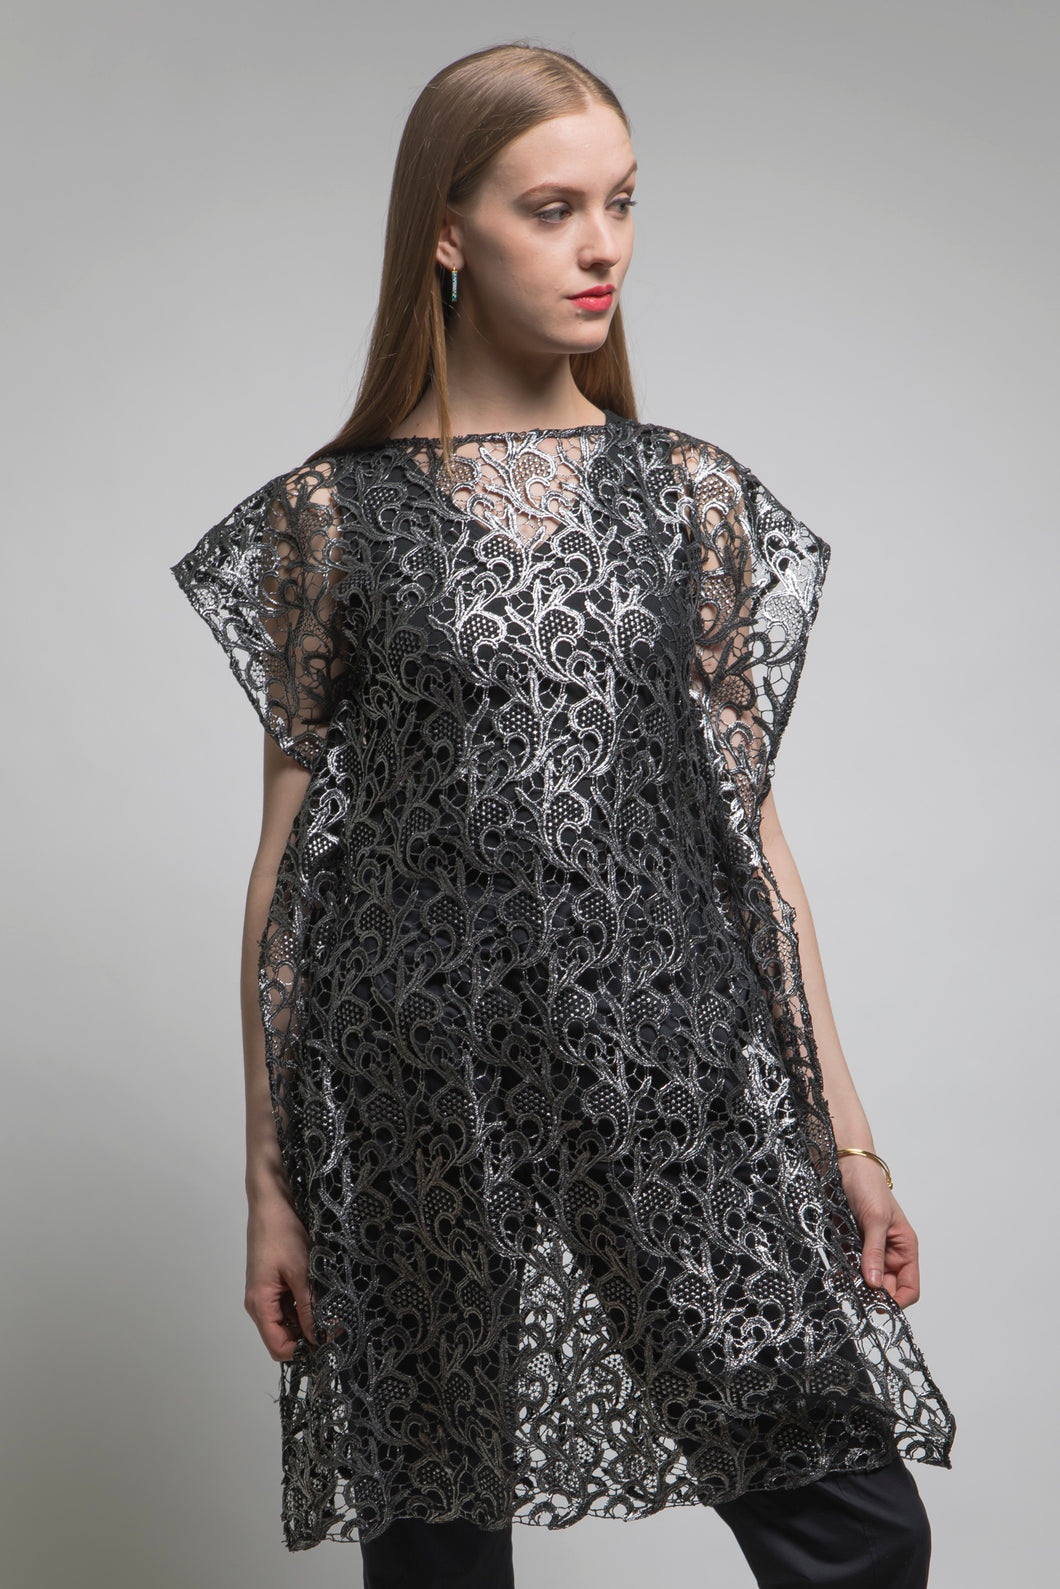 Lace Tunic (Silver) Style# 129L